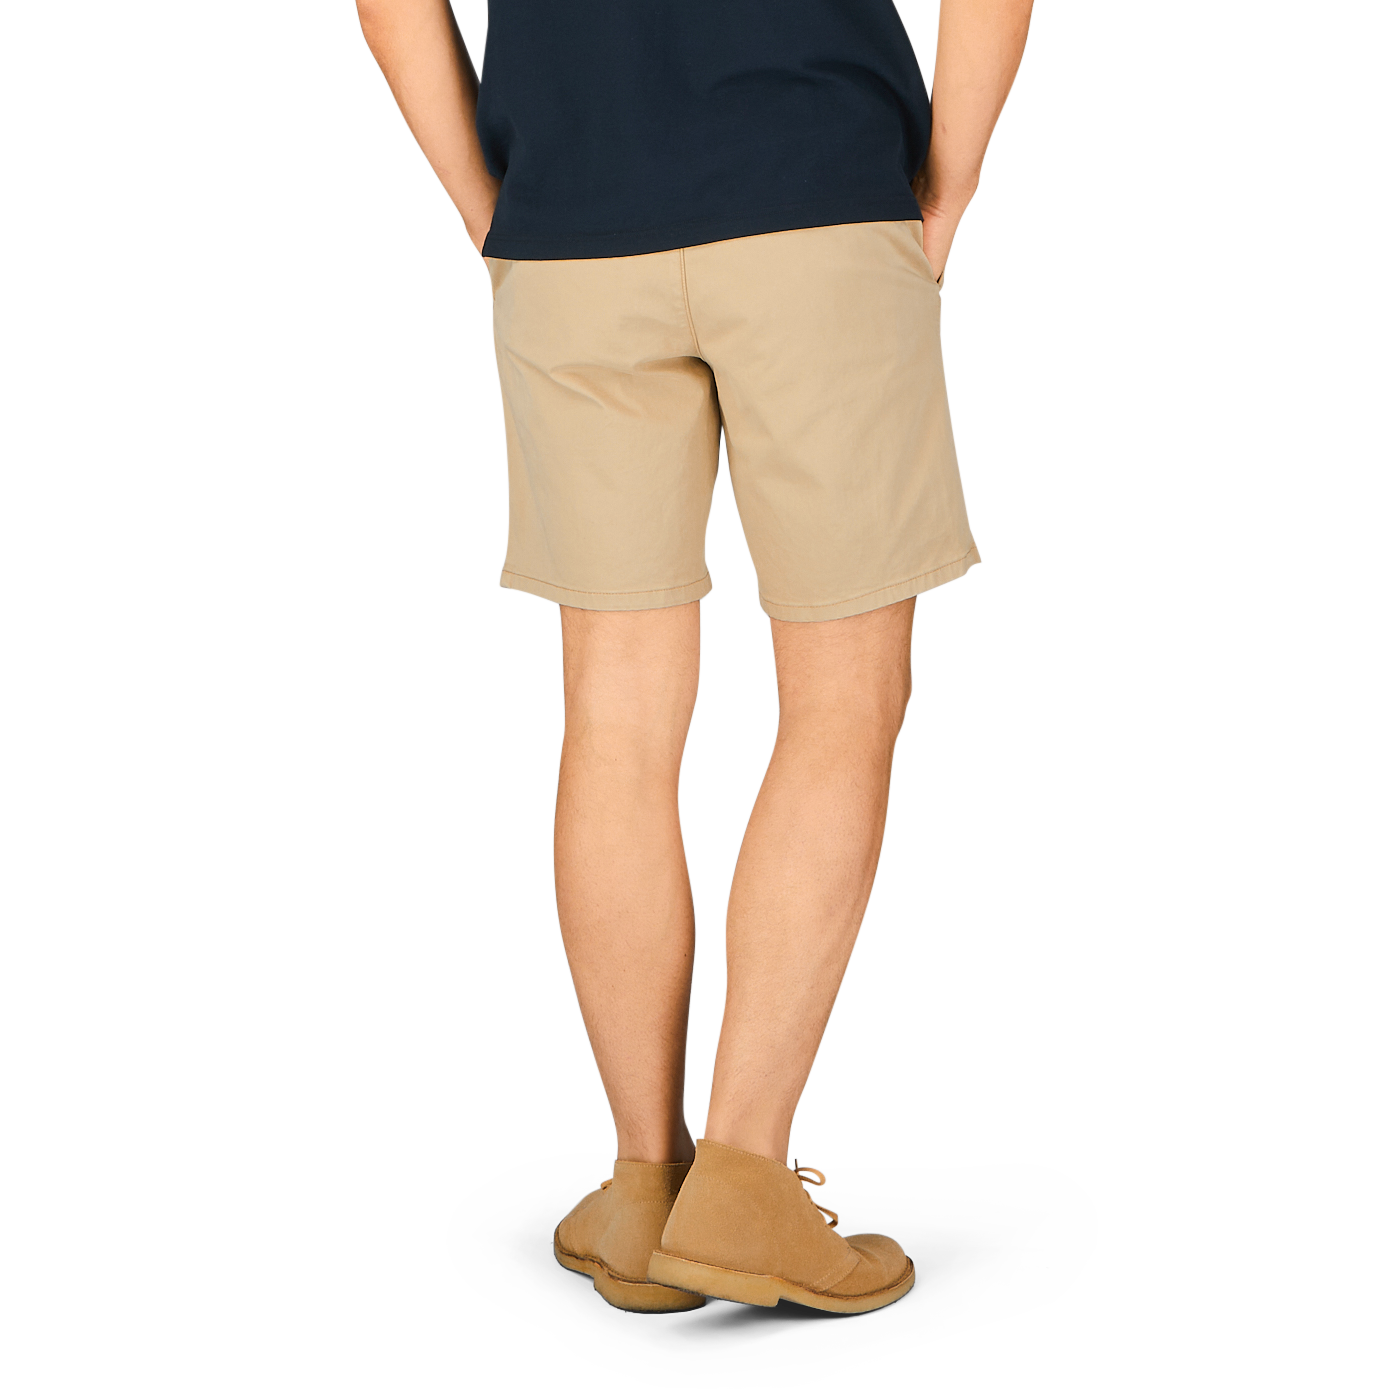 A person standing, wearing khaki beige Paige Phillips shorts and tan shoes, with a dark-colored top, viewed from the waist down.